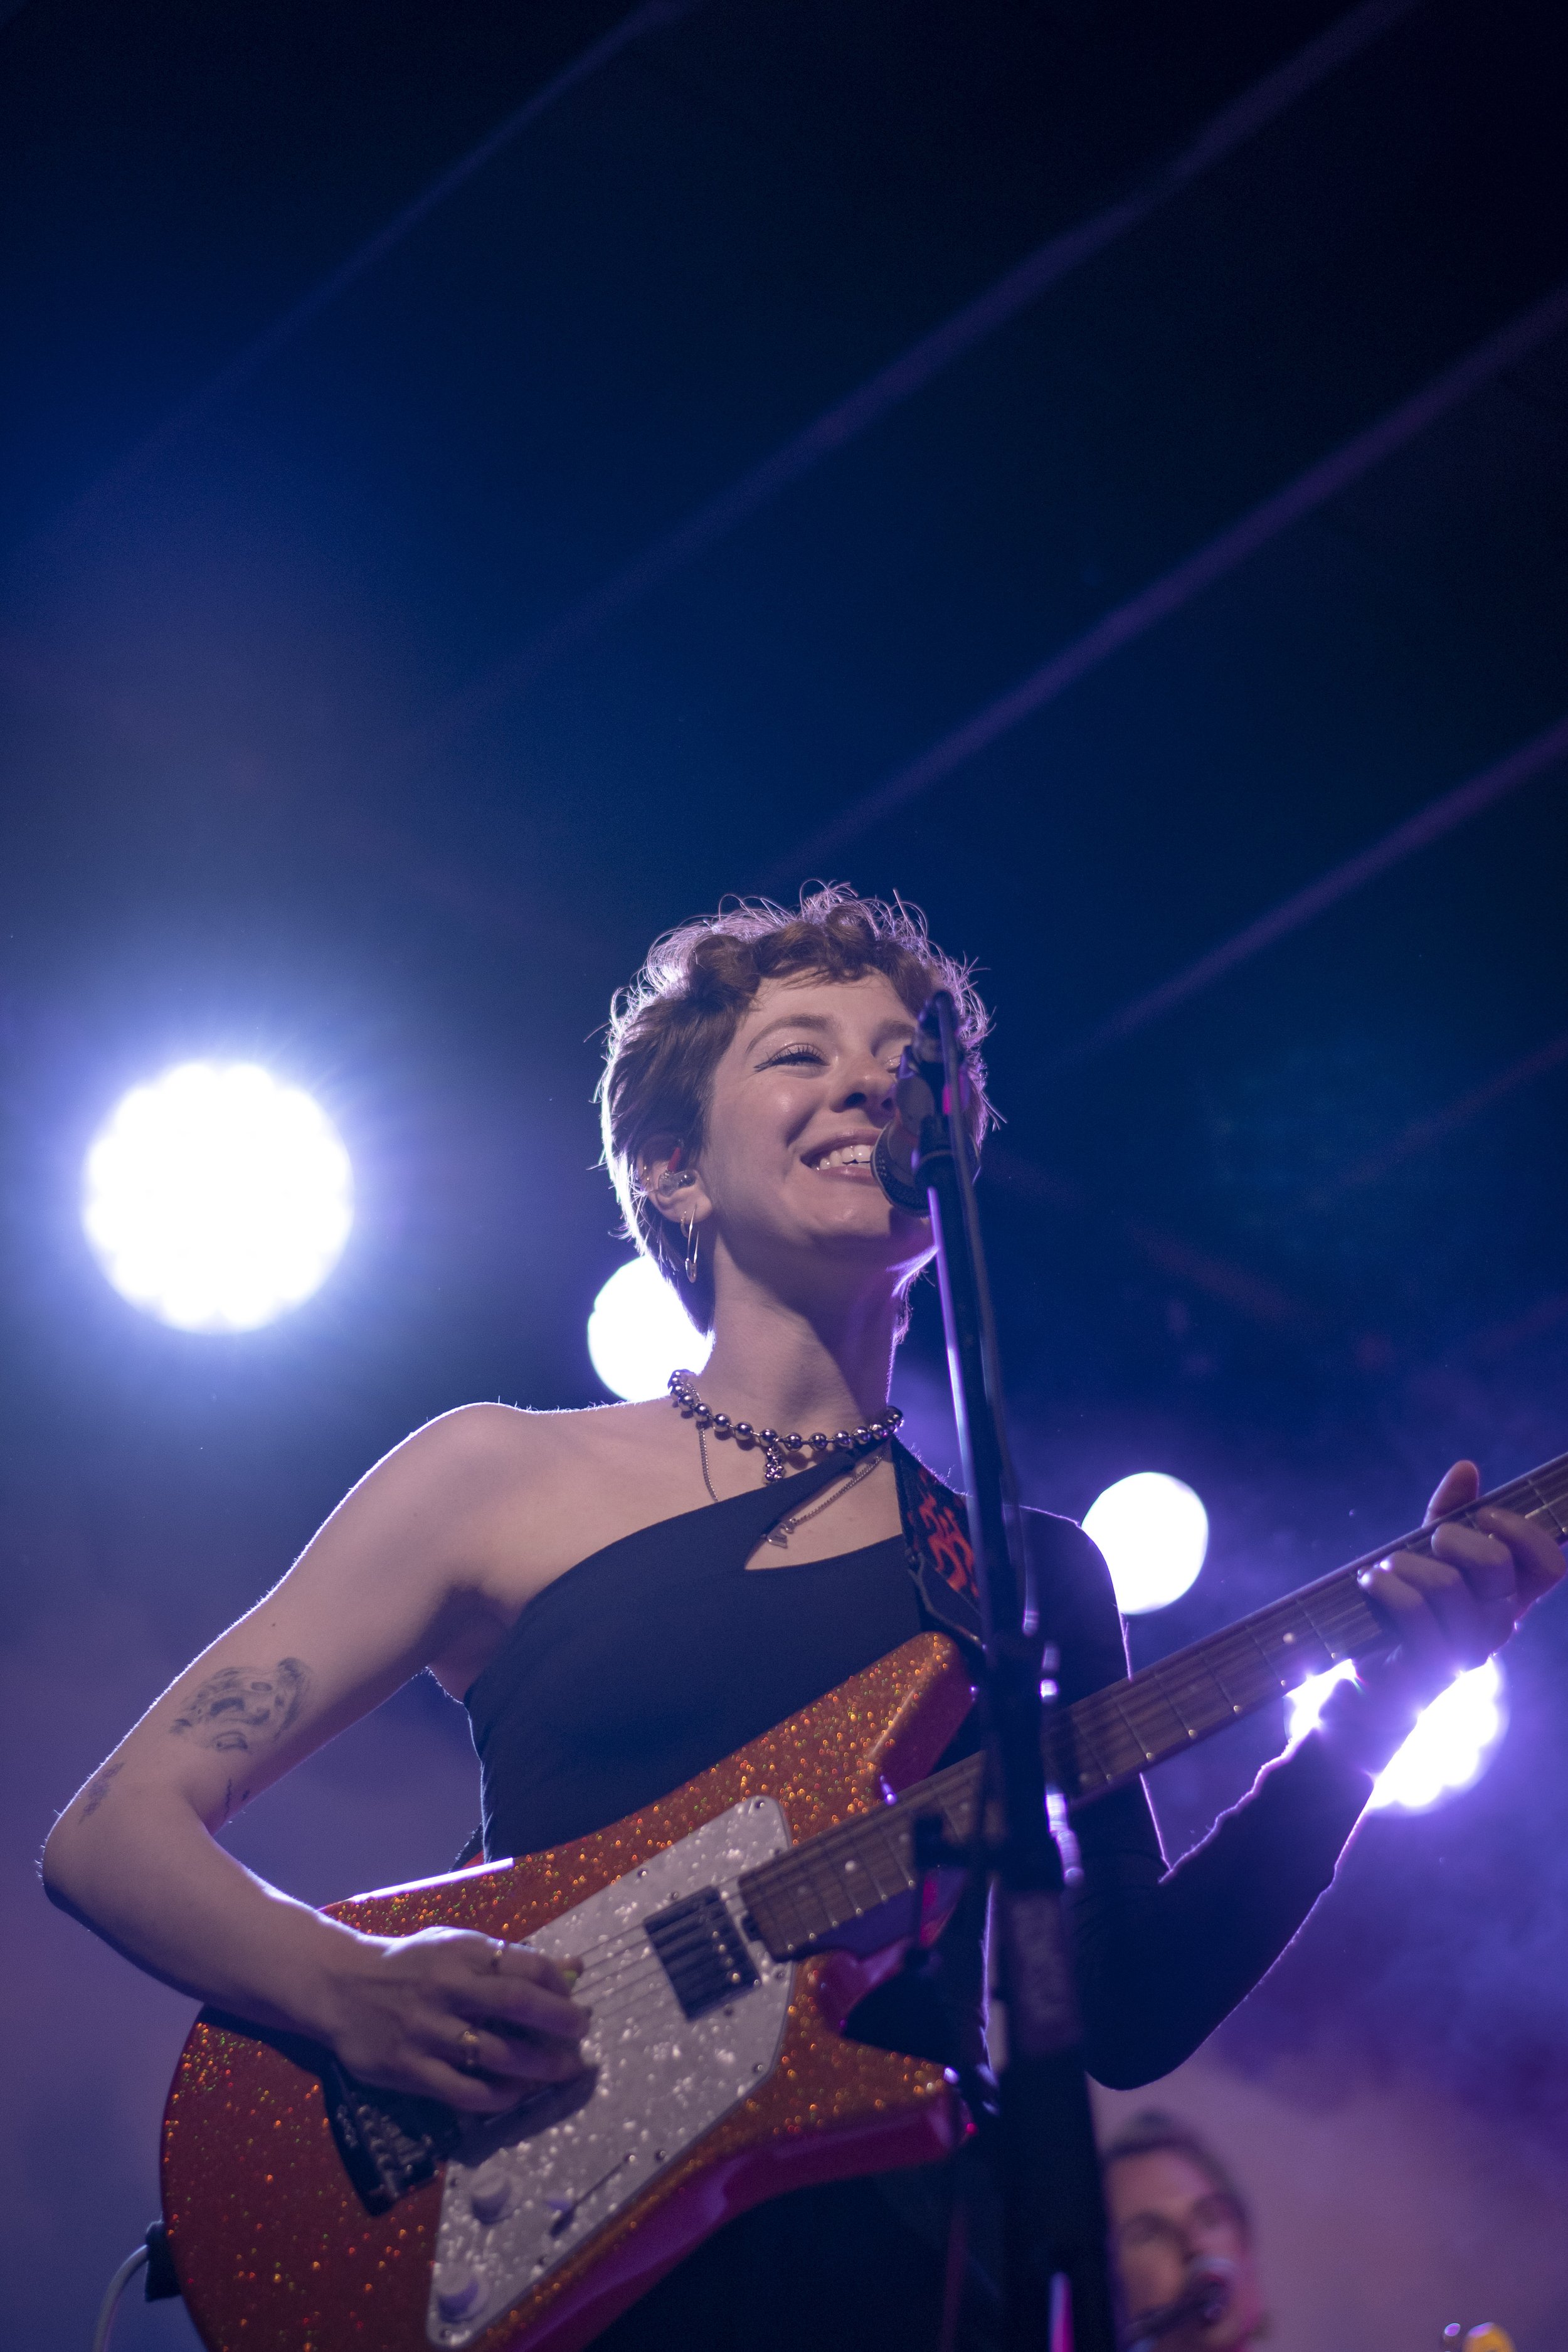  Genessa Gariano plays guitar for The Regrettes. 